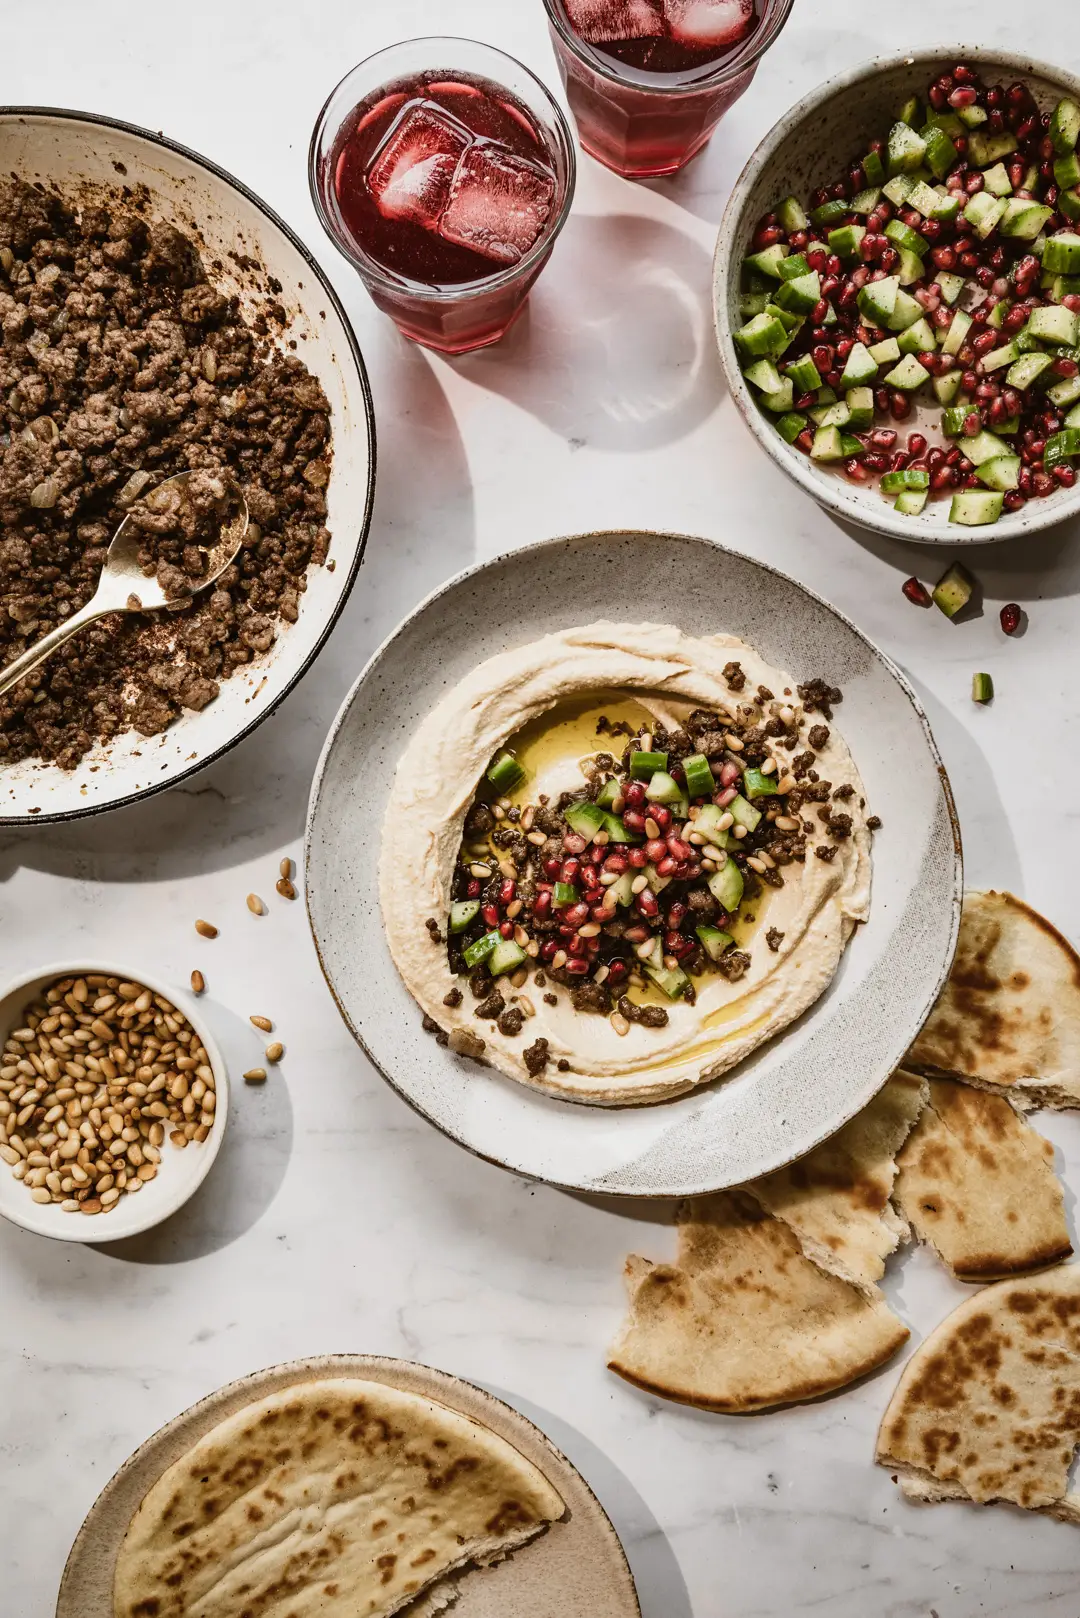 Topped off with a refreshing chopped cucumber and pomegranate salad, we could eat this hummus with vegan spiced meat every day.